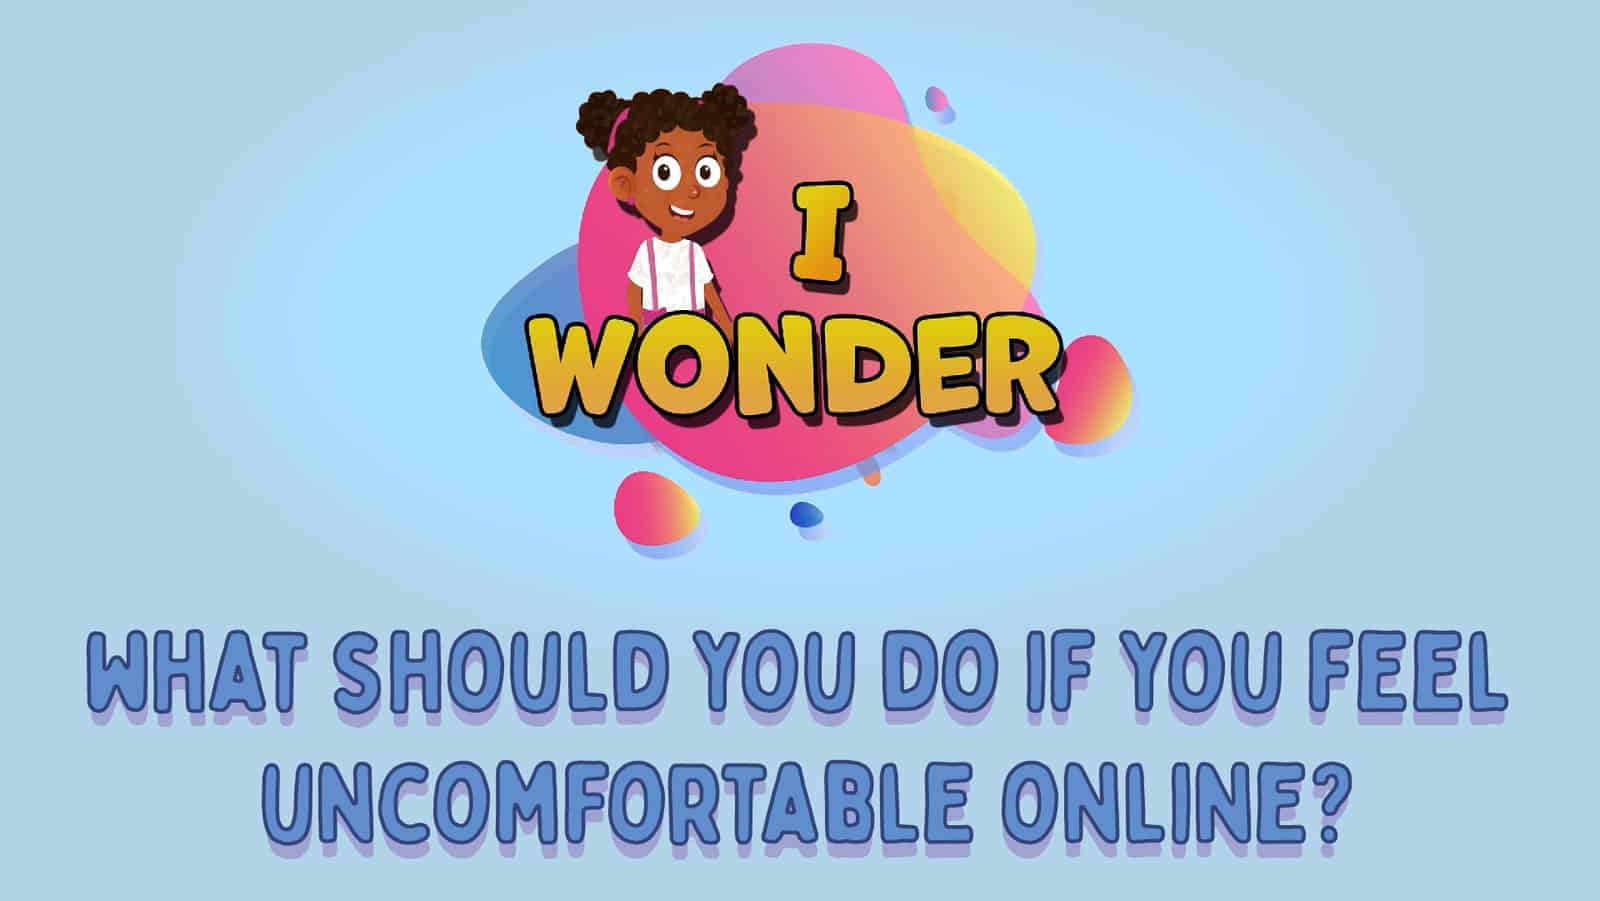 What Should You Do If You Feel Uncomfortable Online?